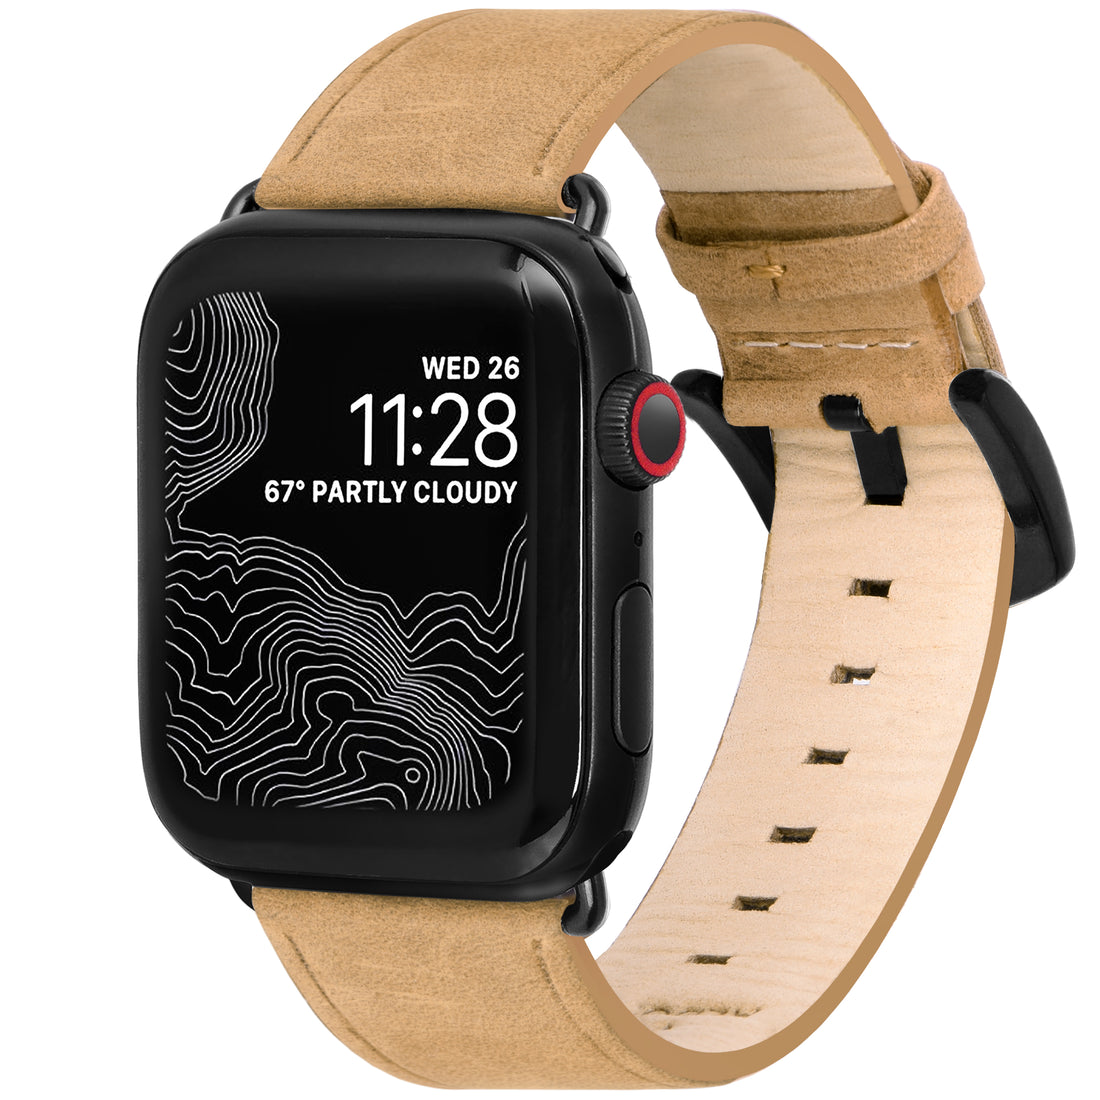 Amar Leather Apple Watch Strap - 38 mm / 40 mm - Natural Camel Colour